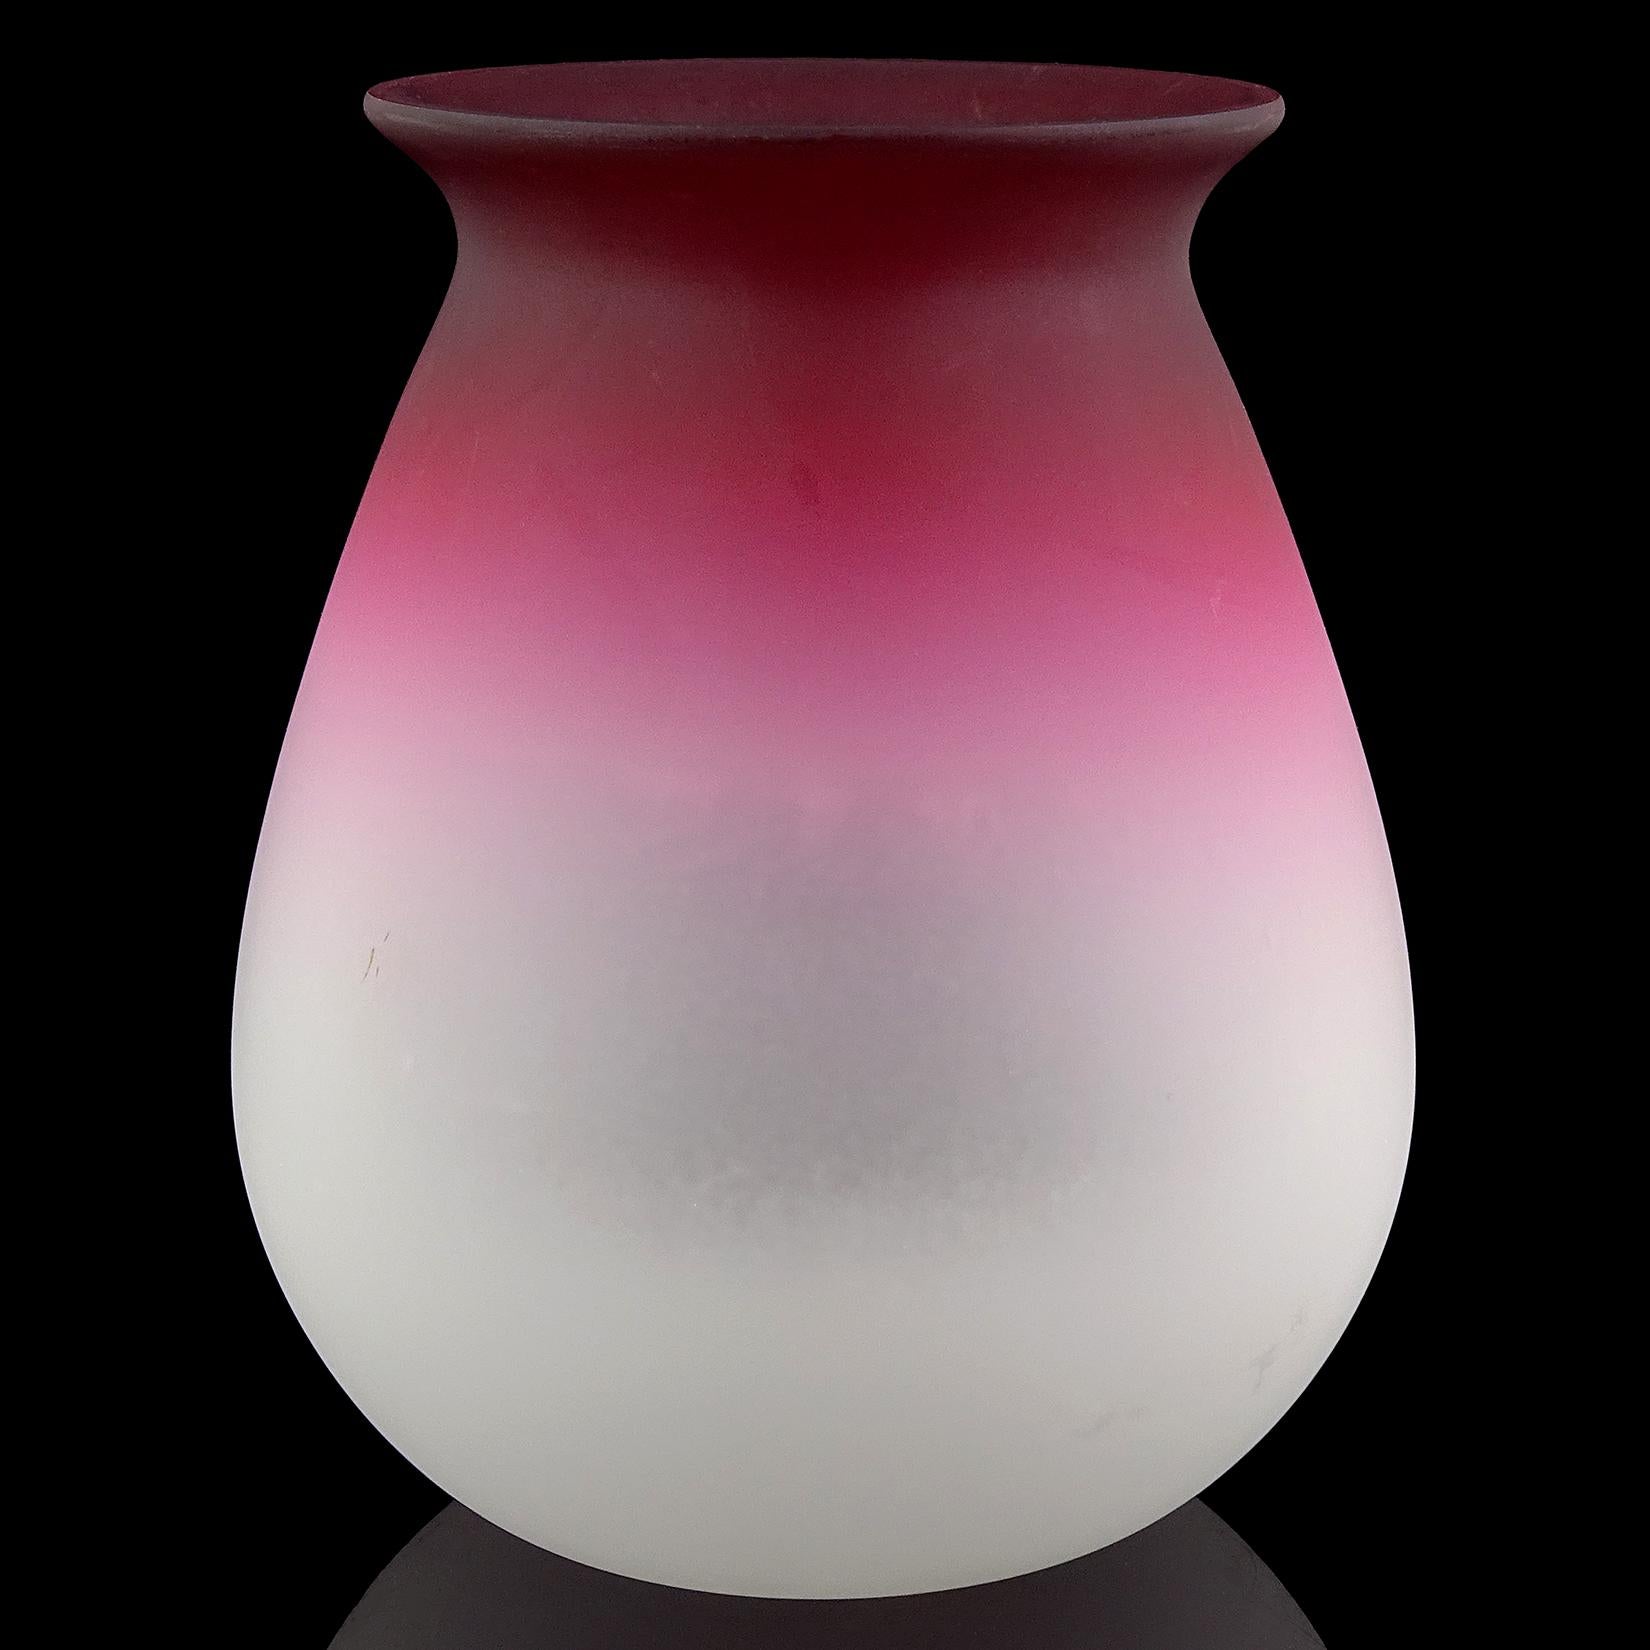 Hand-Crafted Fratelli Toso Murano Deep Red to White Satin Italian Art Glass Flower Vase